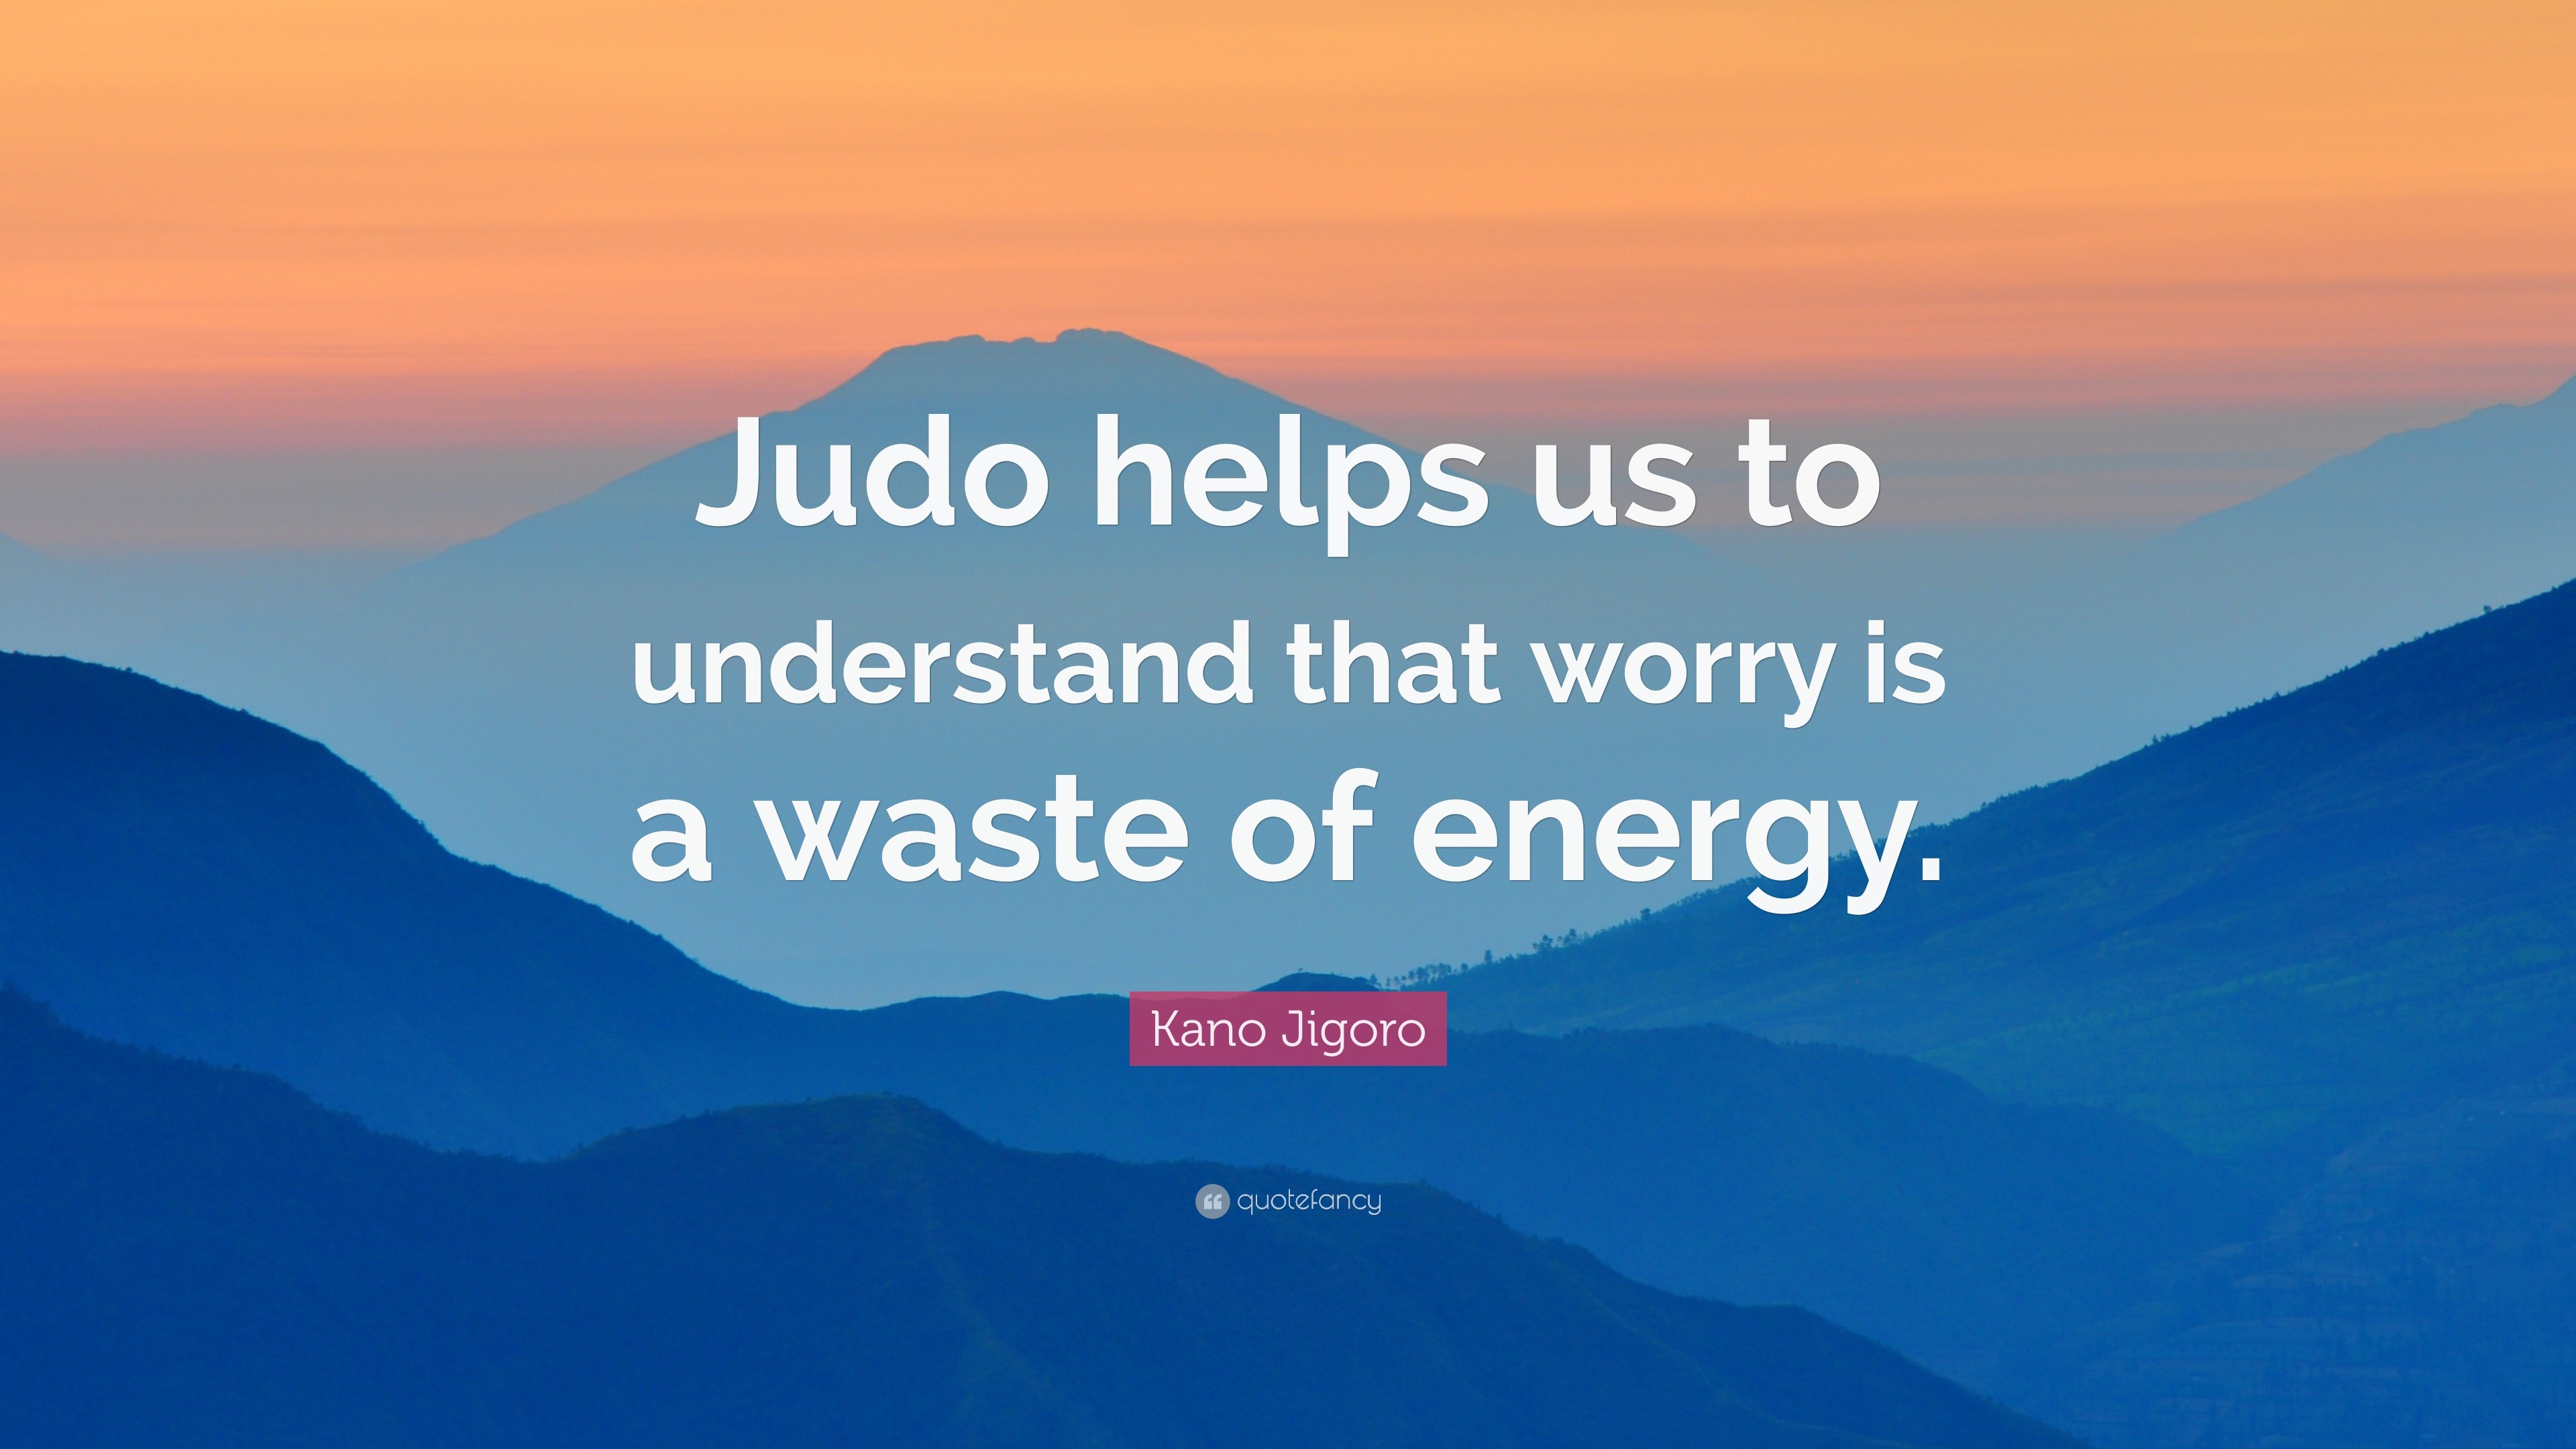 Kano Jigoro Quotes (23 wallpapers) - Quotefancy